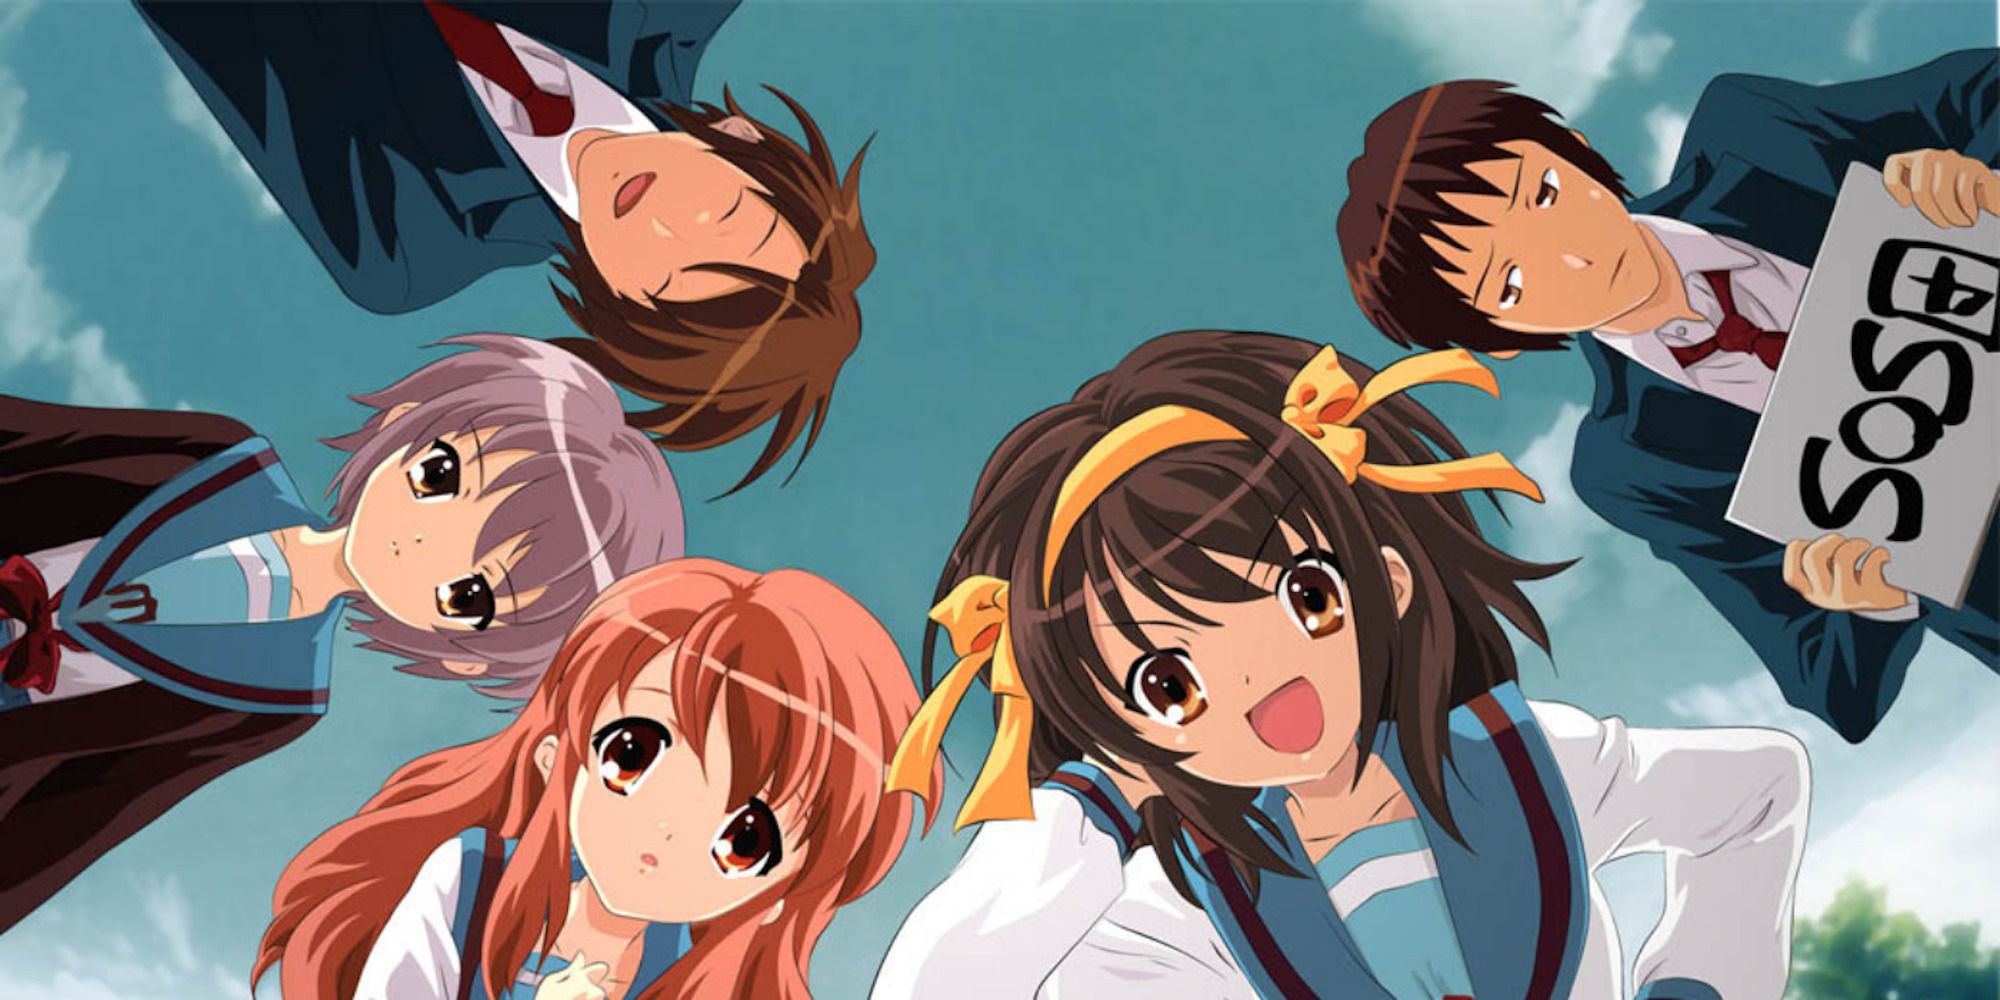 Promo art featuring characters from The Melancholy Of Haruhi Suzumiya